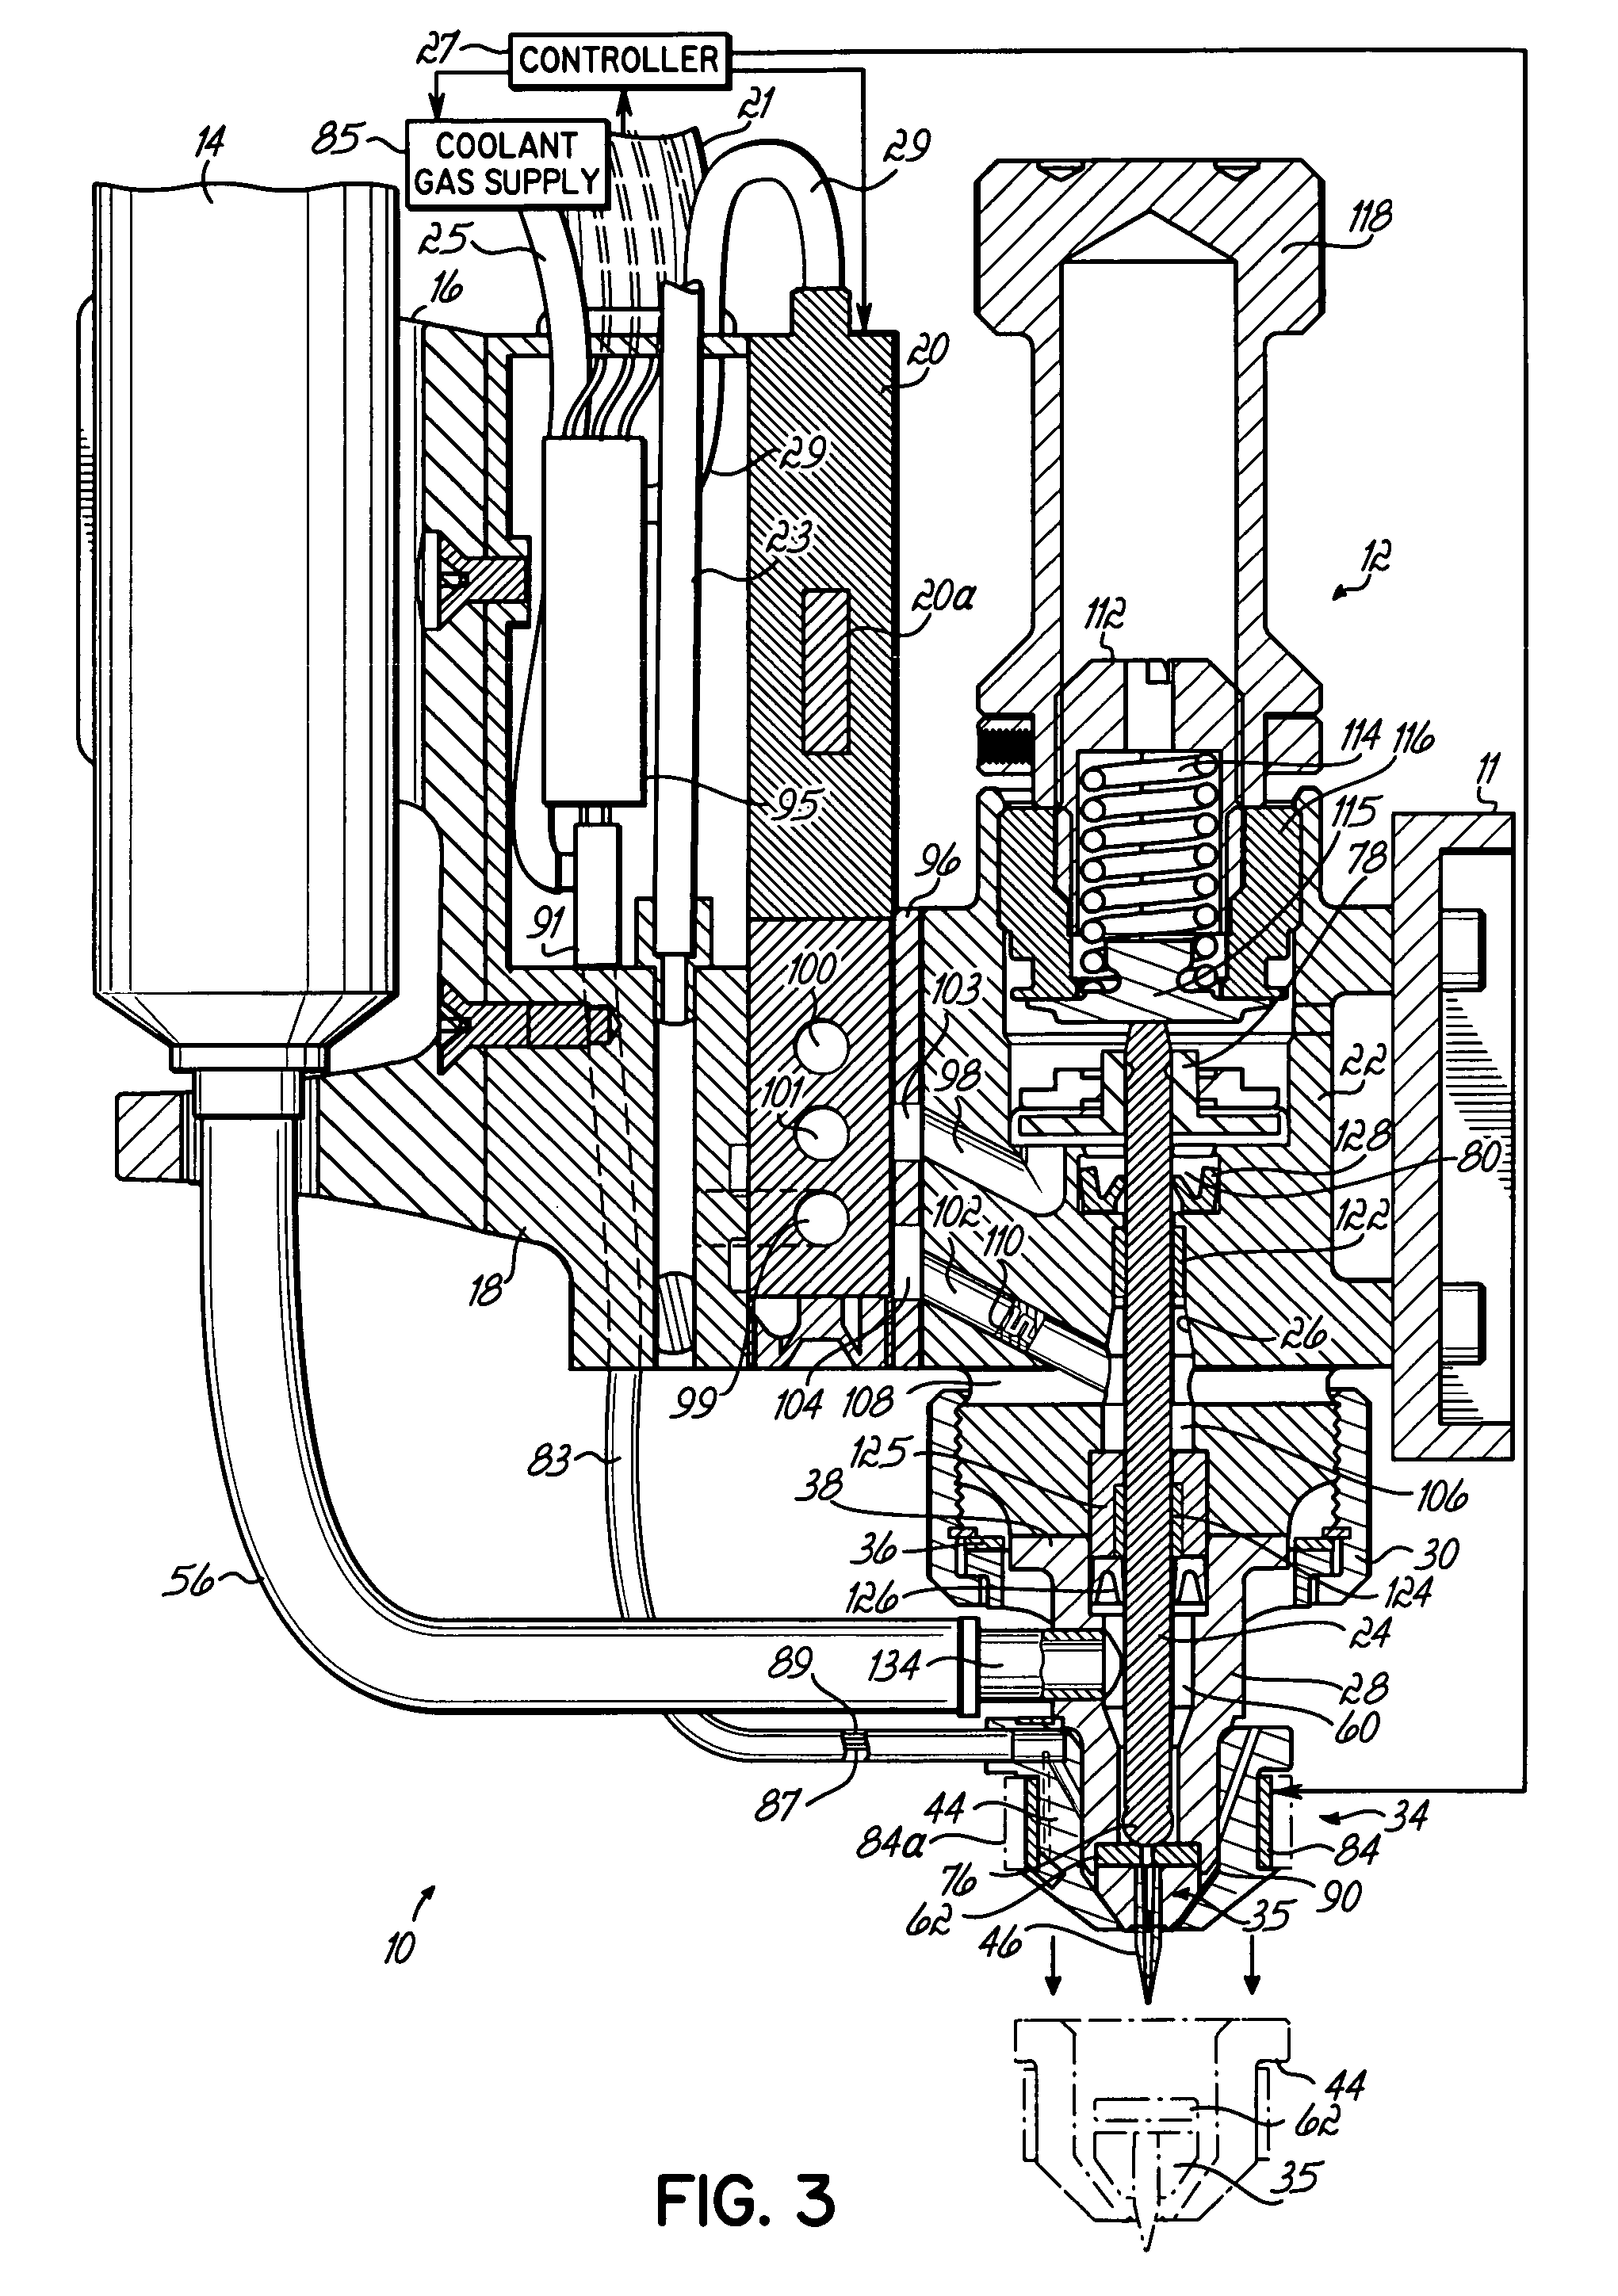 Apparatus and method for dispensing discrete amounts of viscous material